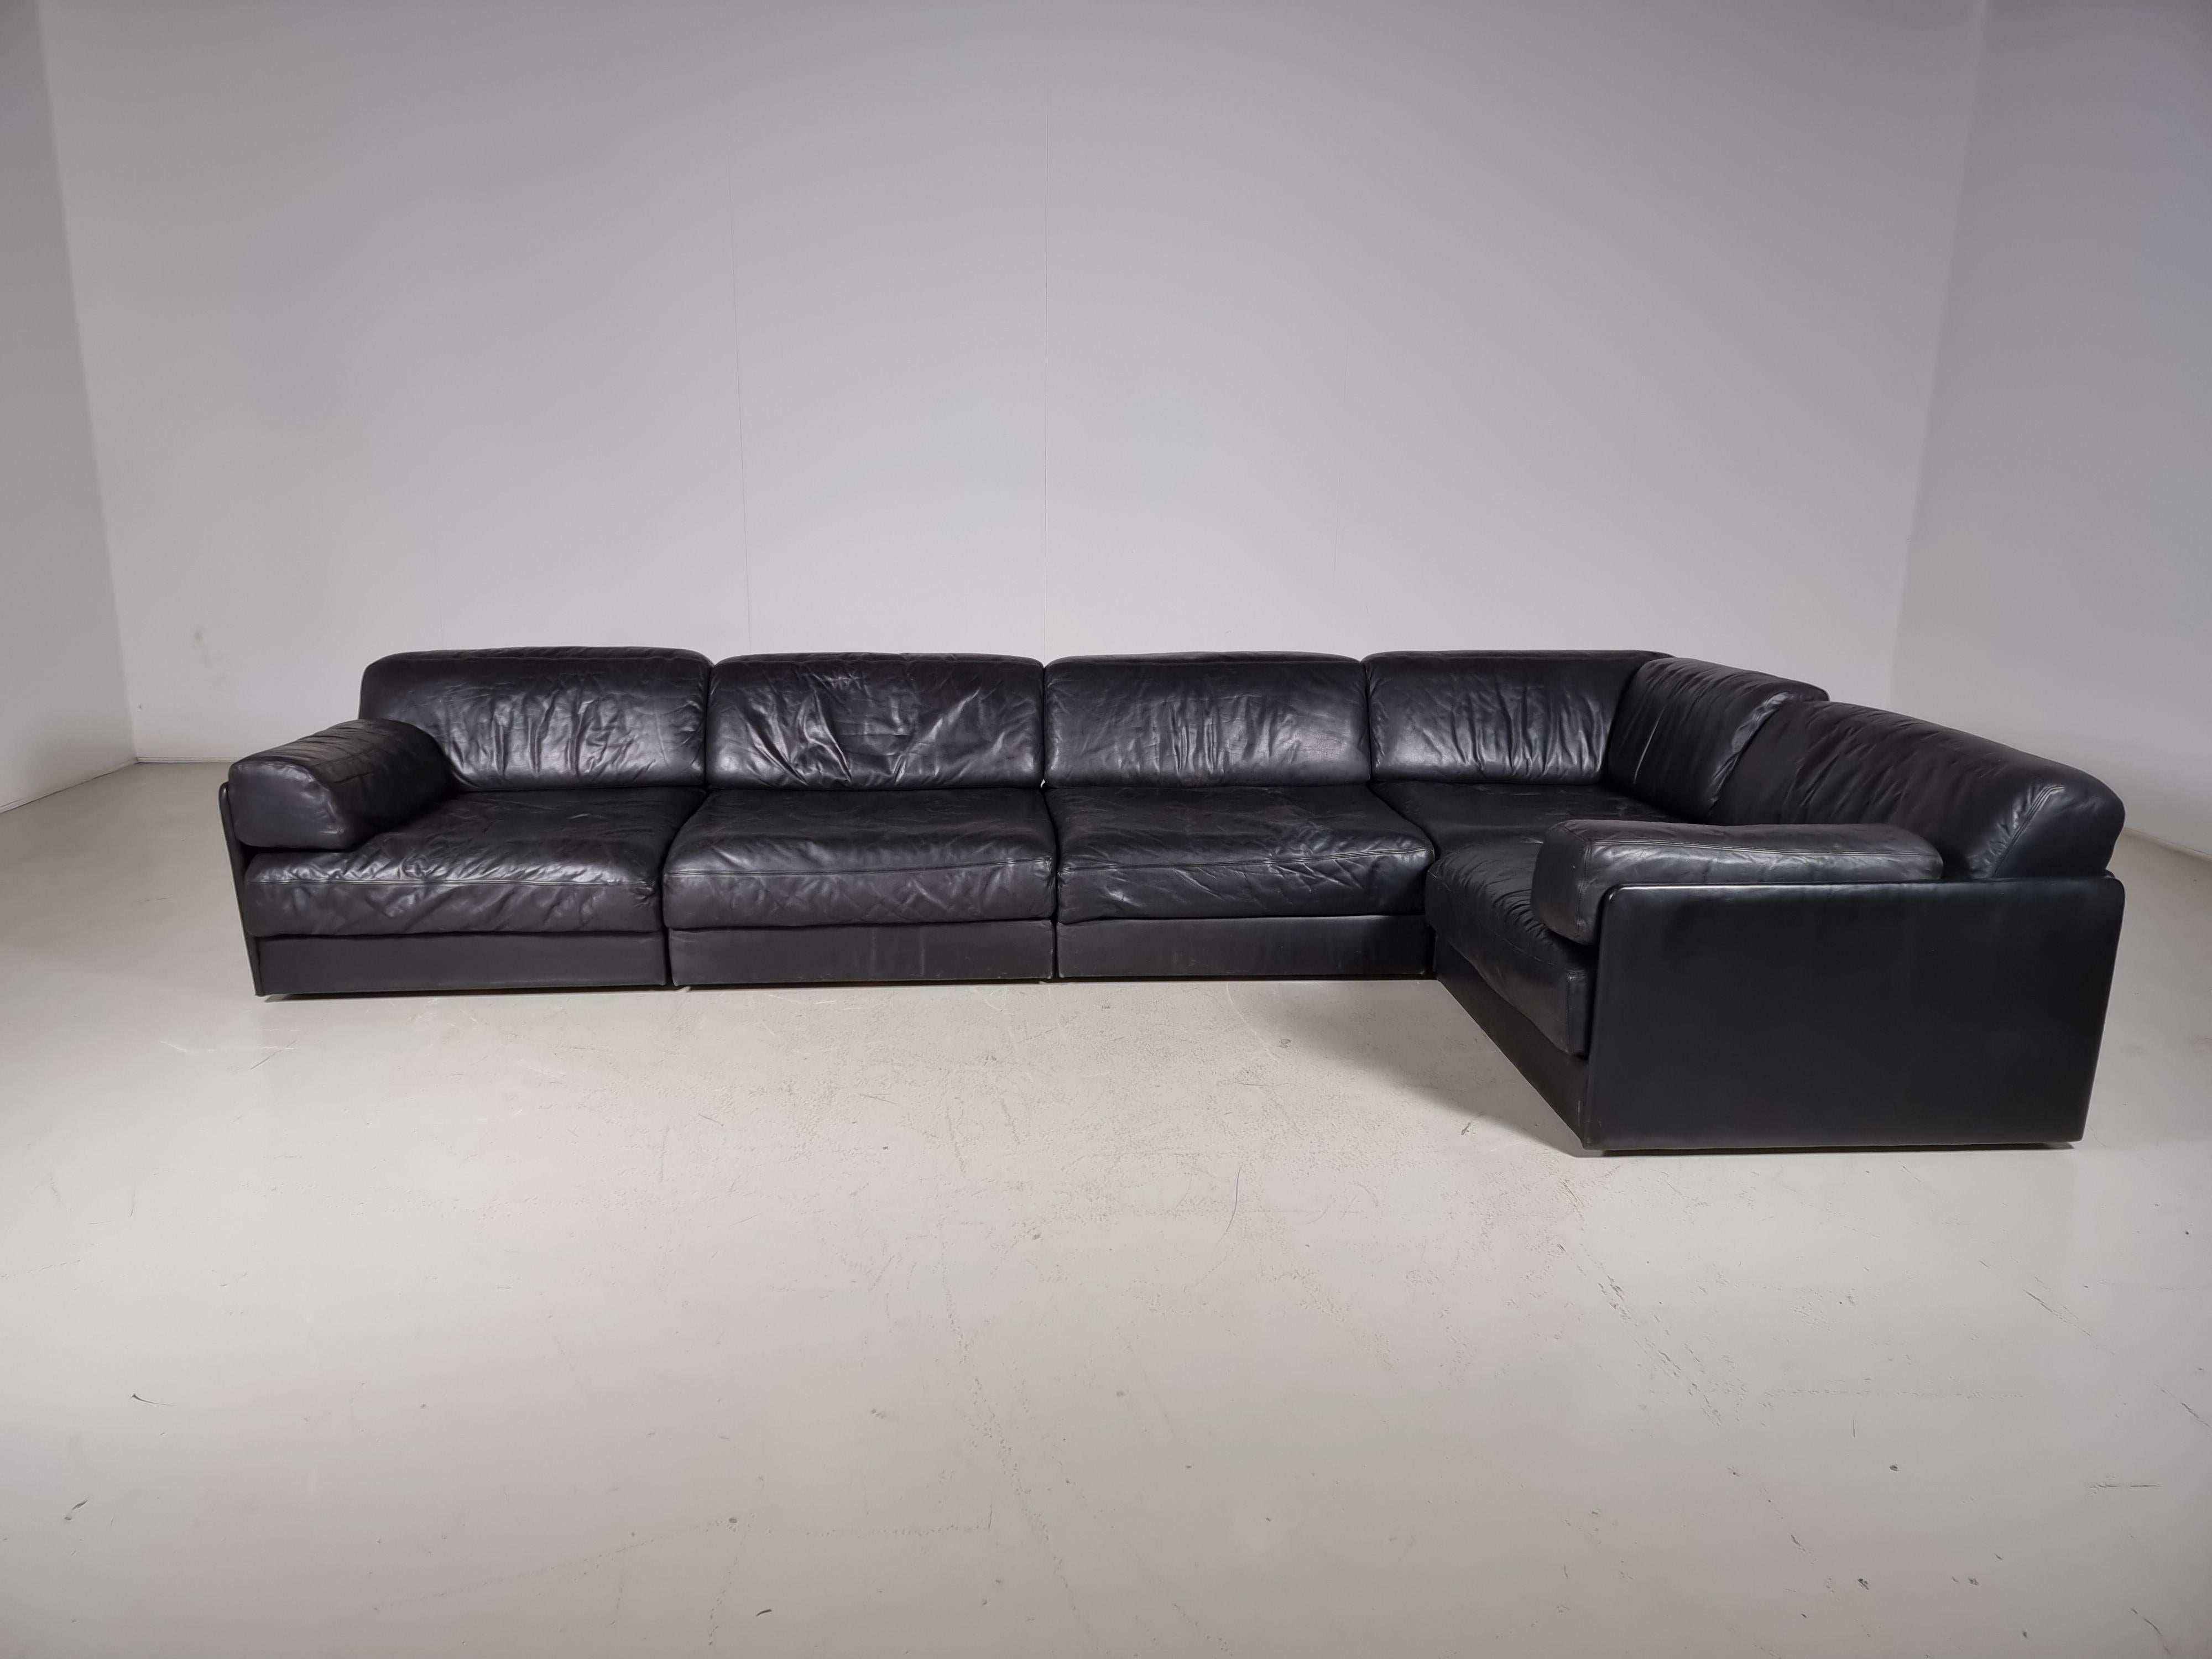 Beautiful 5-piece black leather modular sofa with ottoman by De Sede from the 1970s. The sofa can be converted into a guest bed in just a few simple steps. Extremely comfortable with a nice patina. Many different settings are possible.

Beautiful